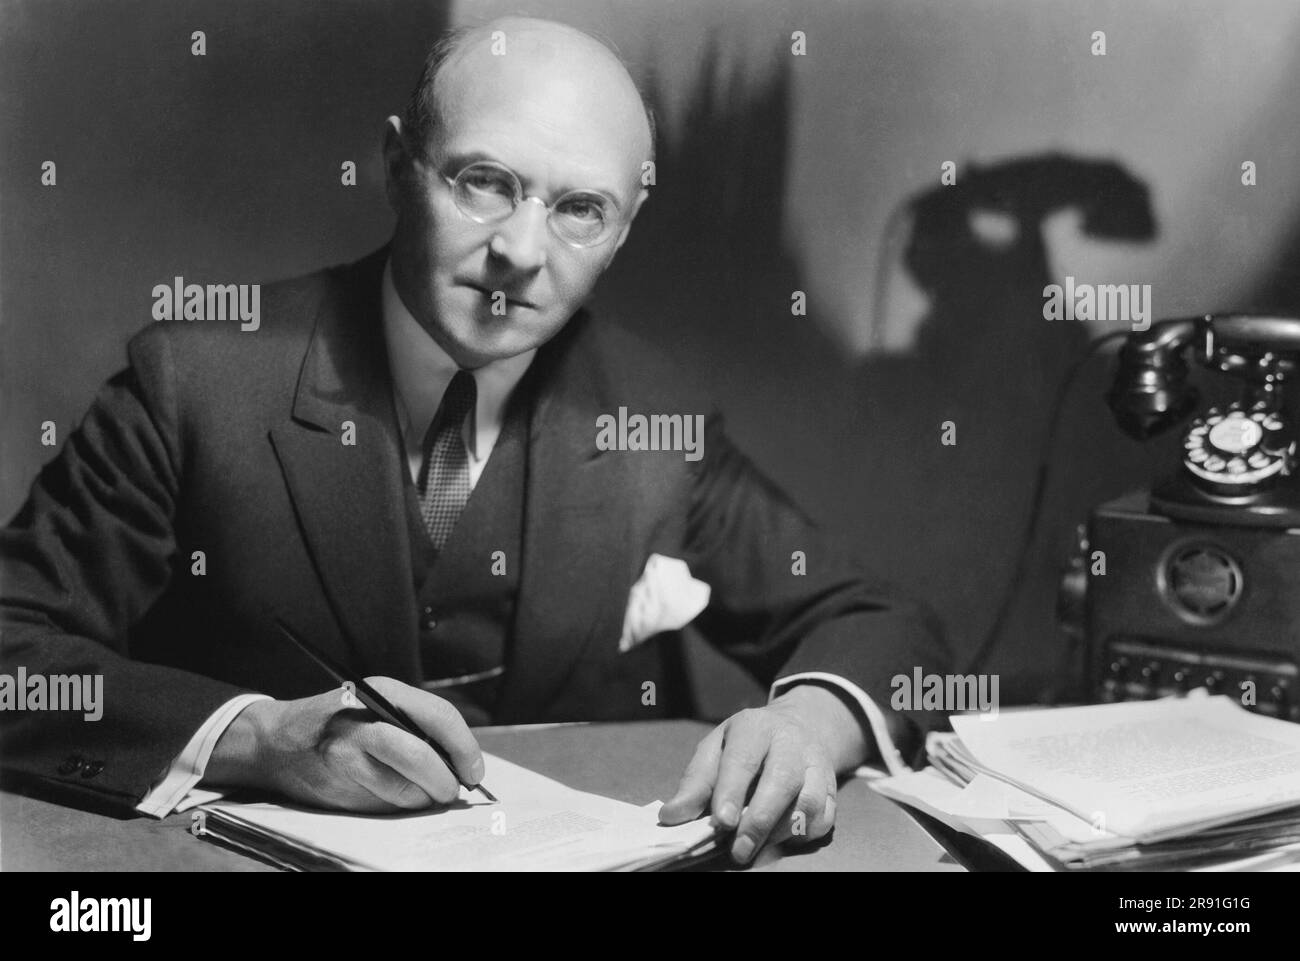 Washington, D.C.:  February 23, 1931 Assistant Attorney General John Lord O'Brian at his desk. Stock Photo